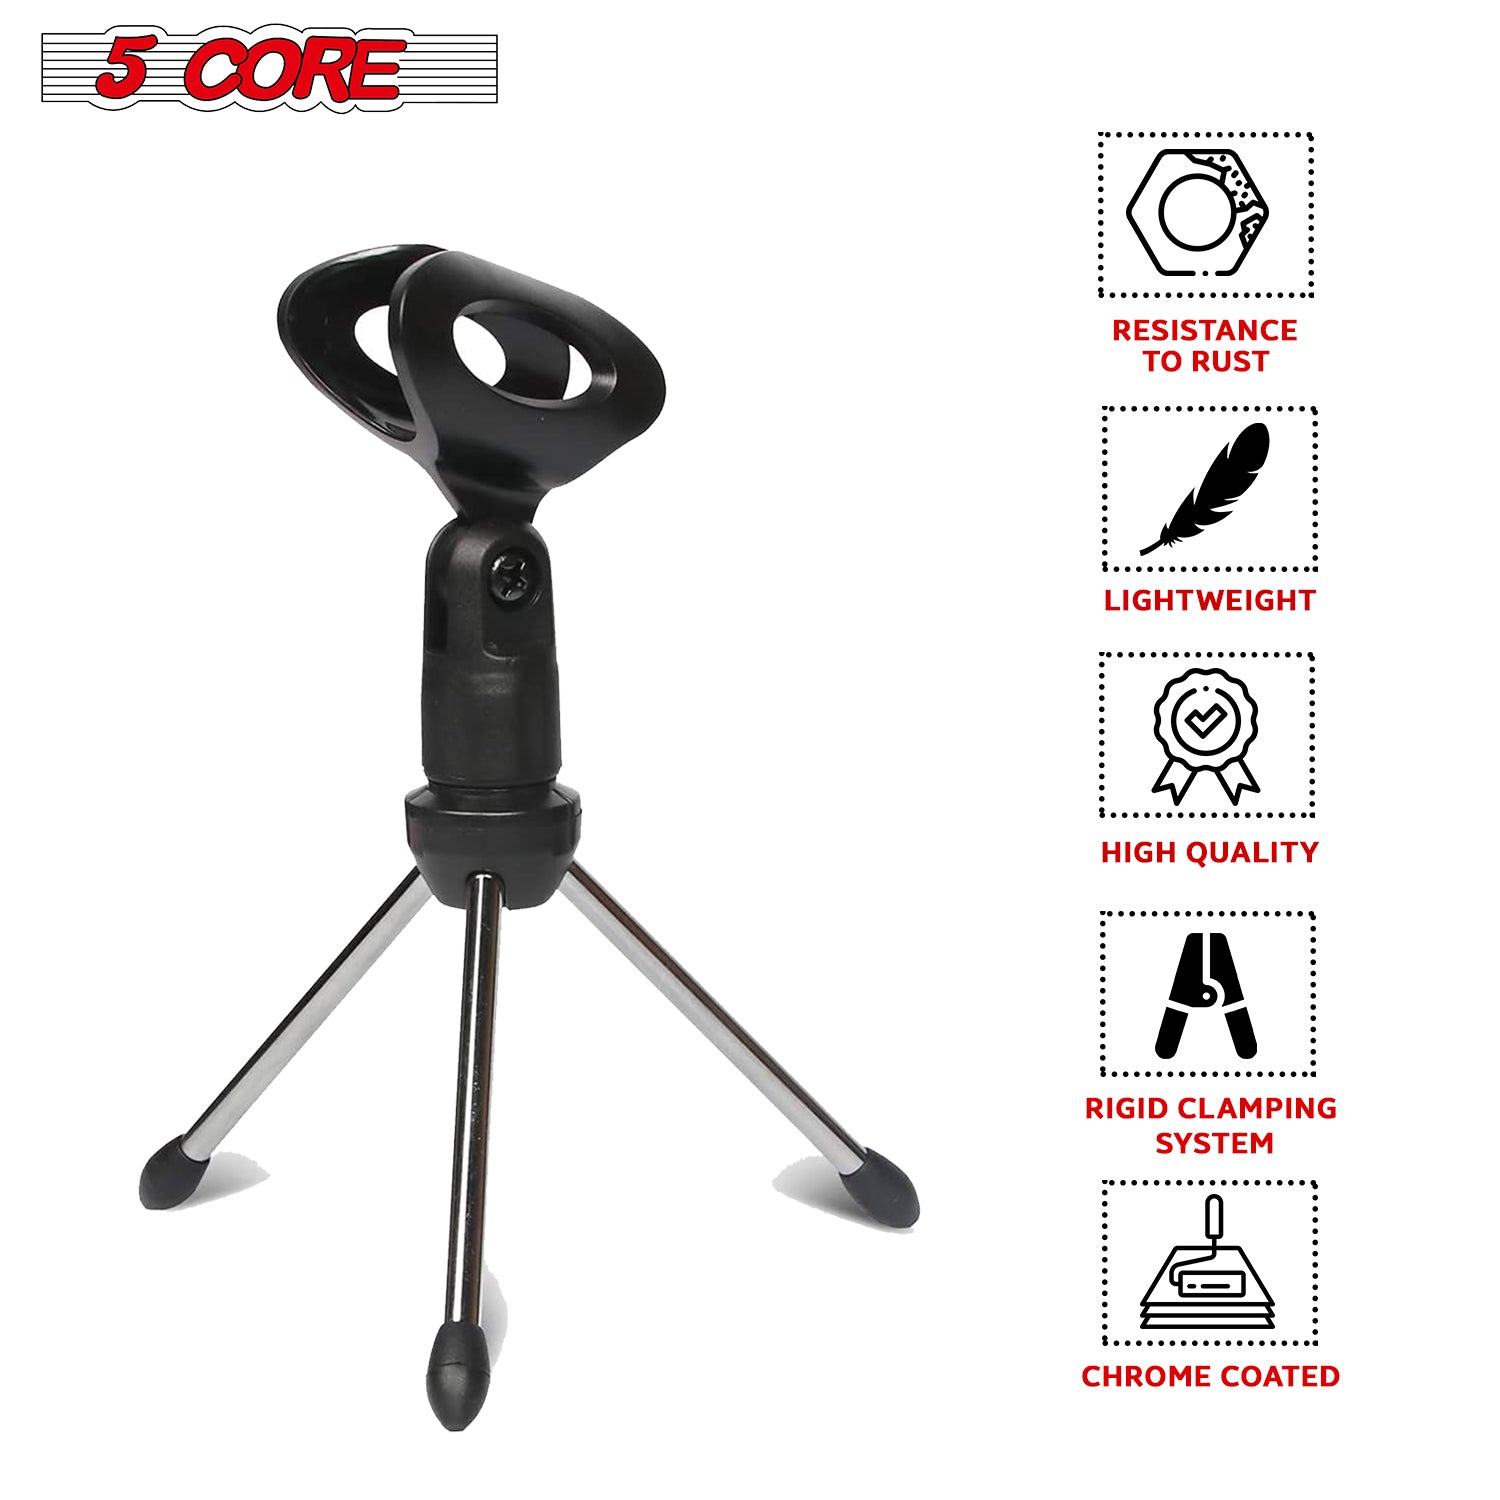 5 Core Mini Tripod Desktop Microphone Stand with Clip for Wired Mics Collapsible Legs Shockproof Easy To Store Adjustable Angle for Podcasts Online Chat Lectures Streaming -MINI TRIPOD MIC STAND